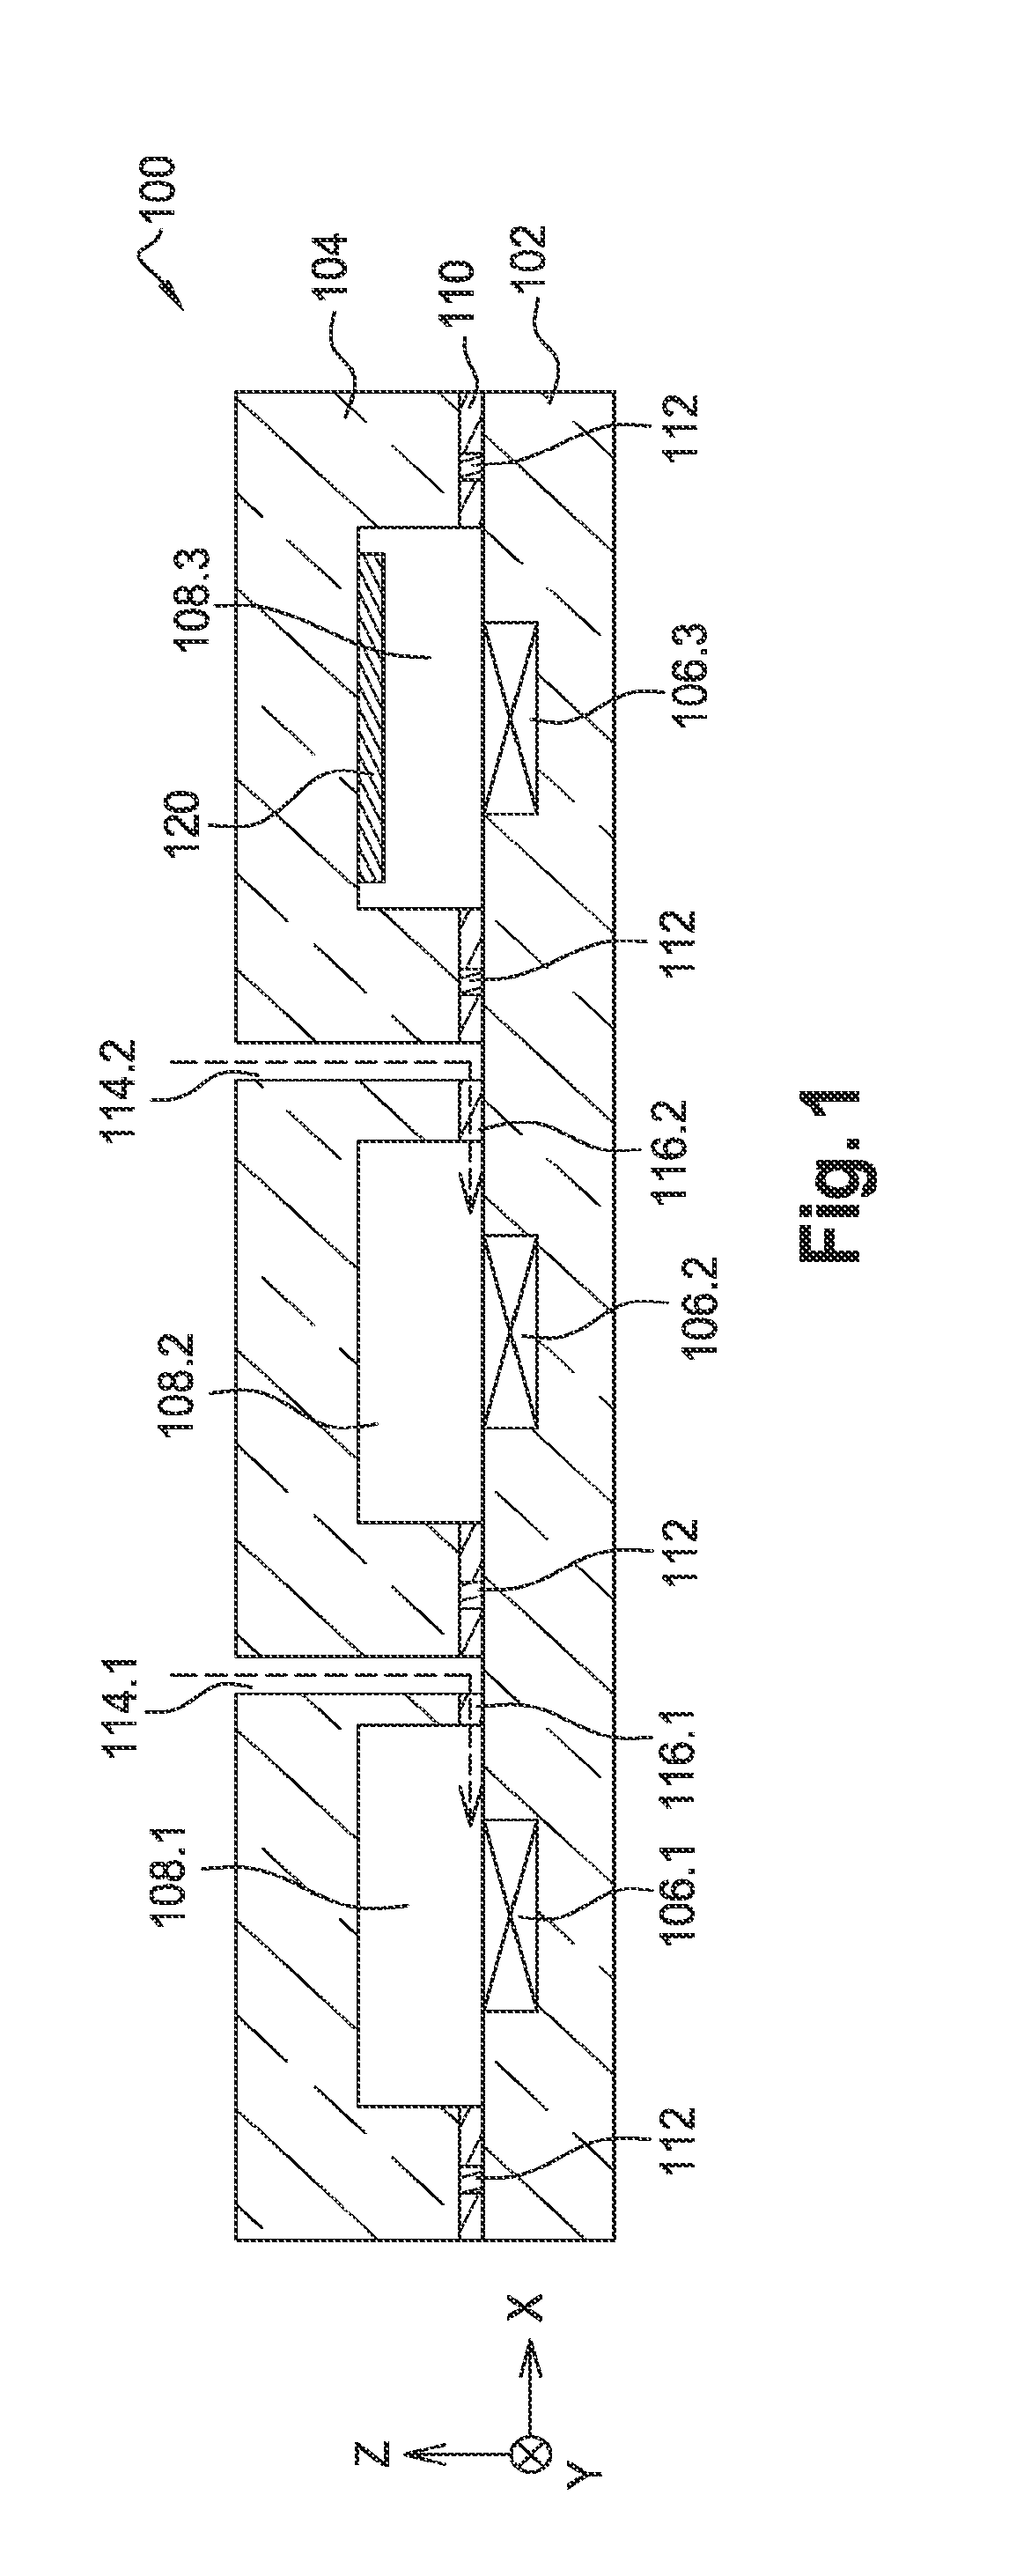 Package structure including a cavity coupled to an injection gas channel composed of a permeable material